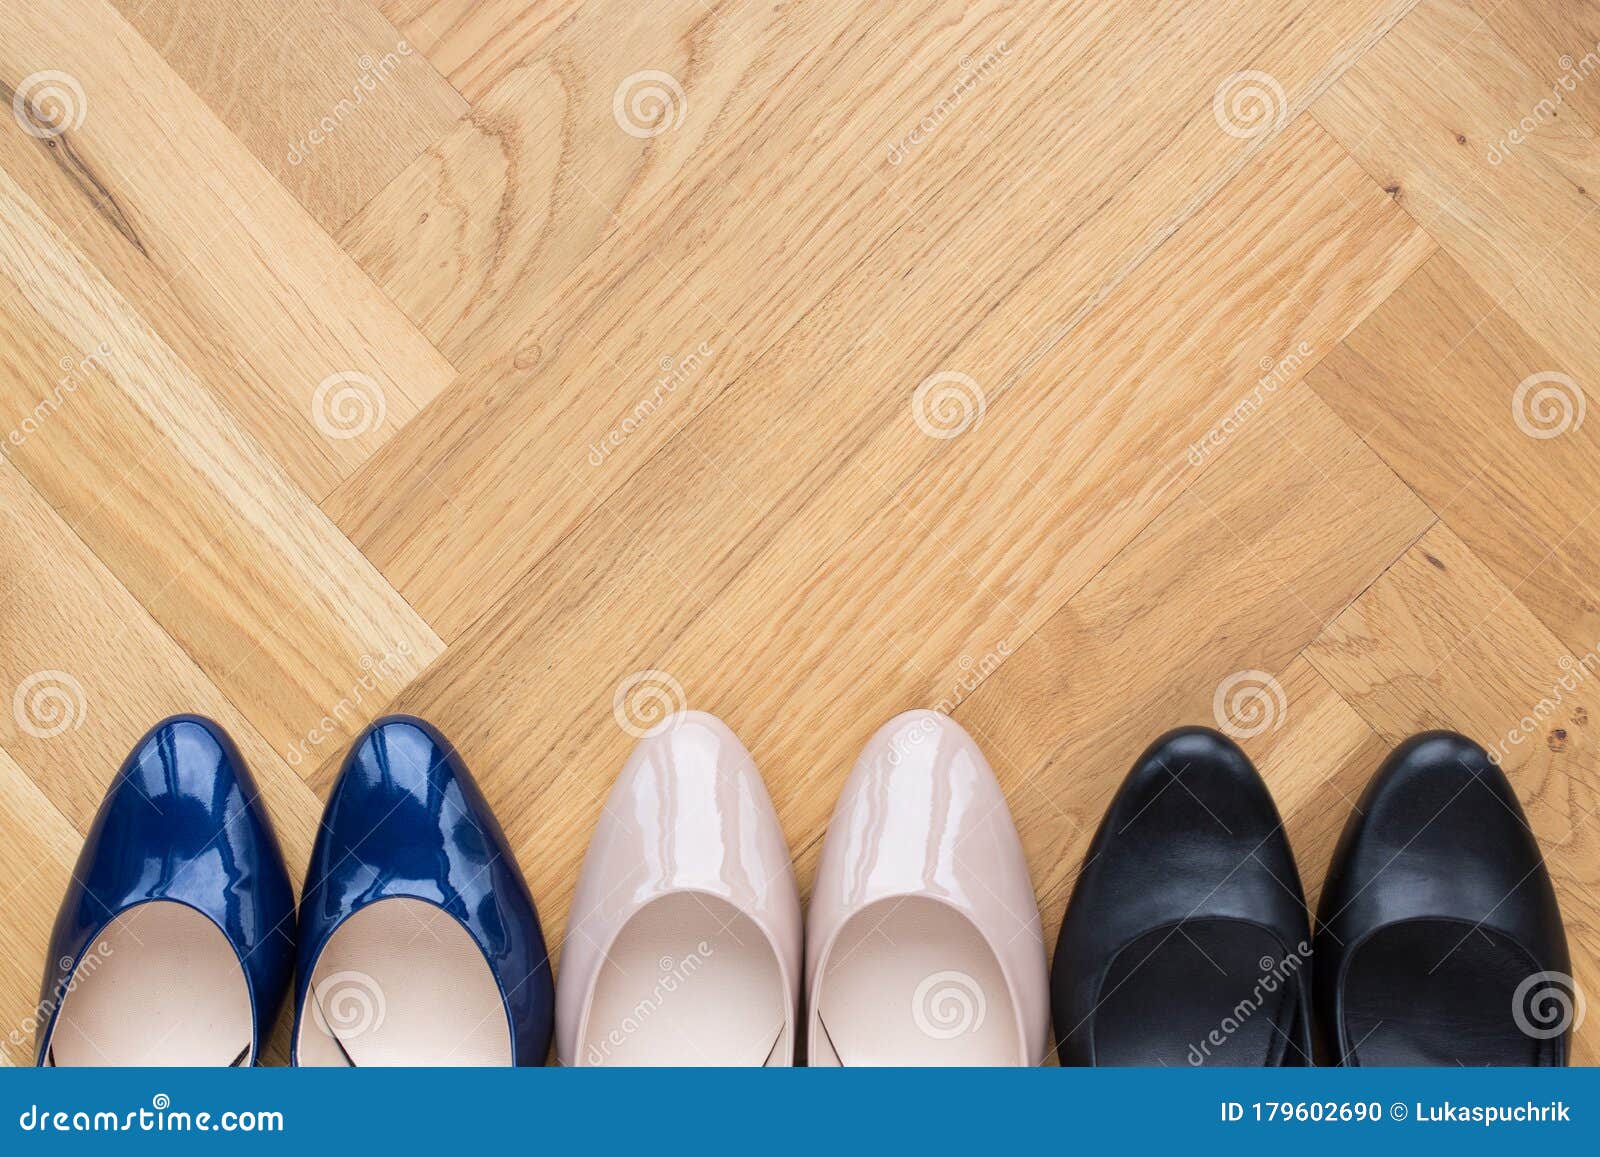 Modern Fashionable Shoes with Heels for Her Stock Photo - Image of care ...